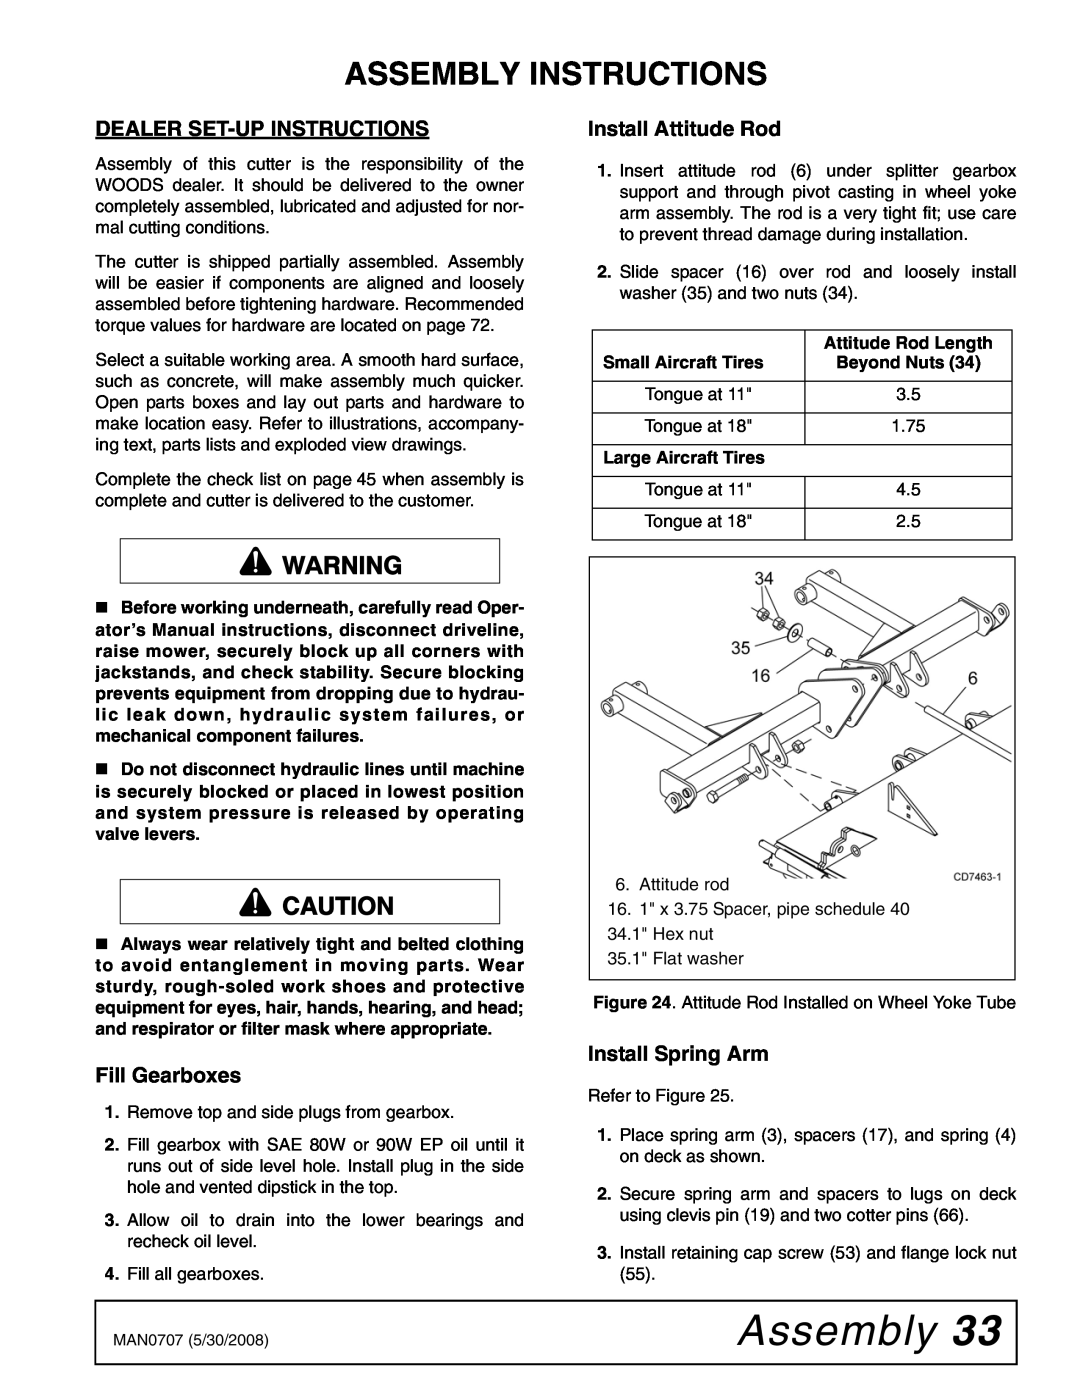 Woods Equipment BW126-3 manual Assembly Instructions, Dealer Set-Up Instructions, Fill Gearboxes, Install Attitude Rod 